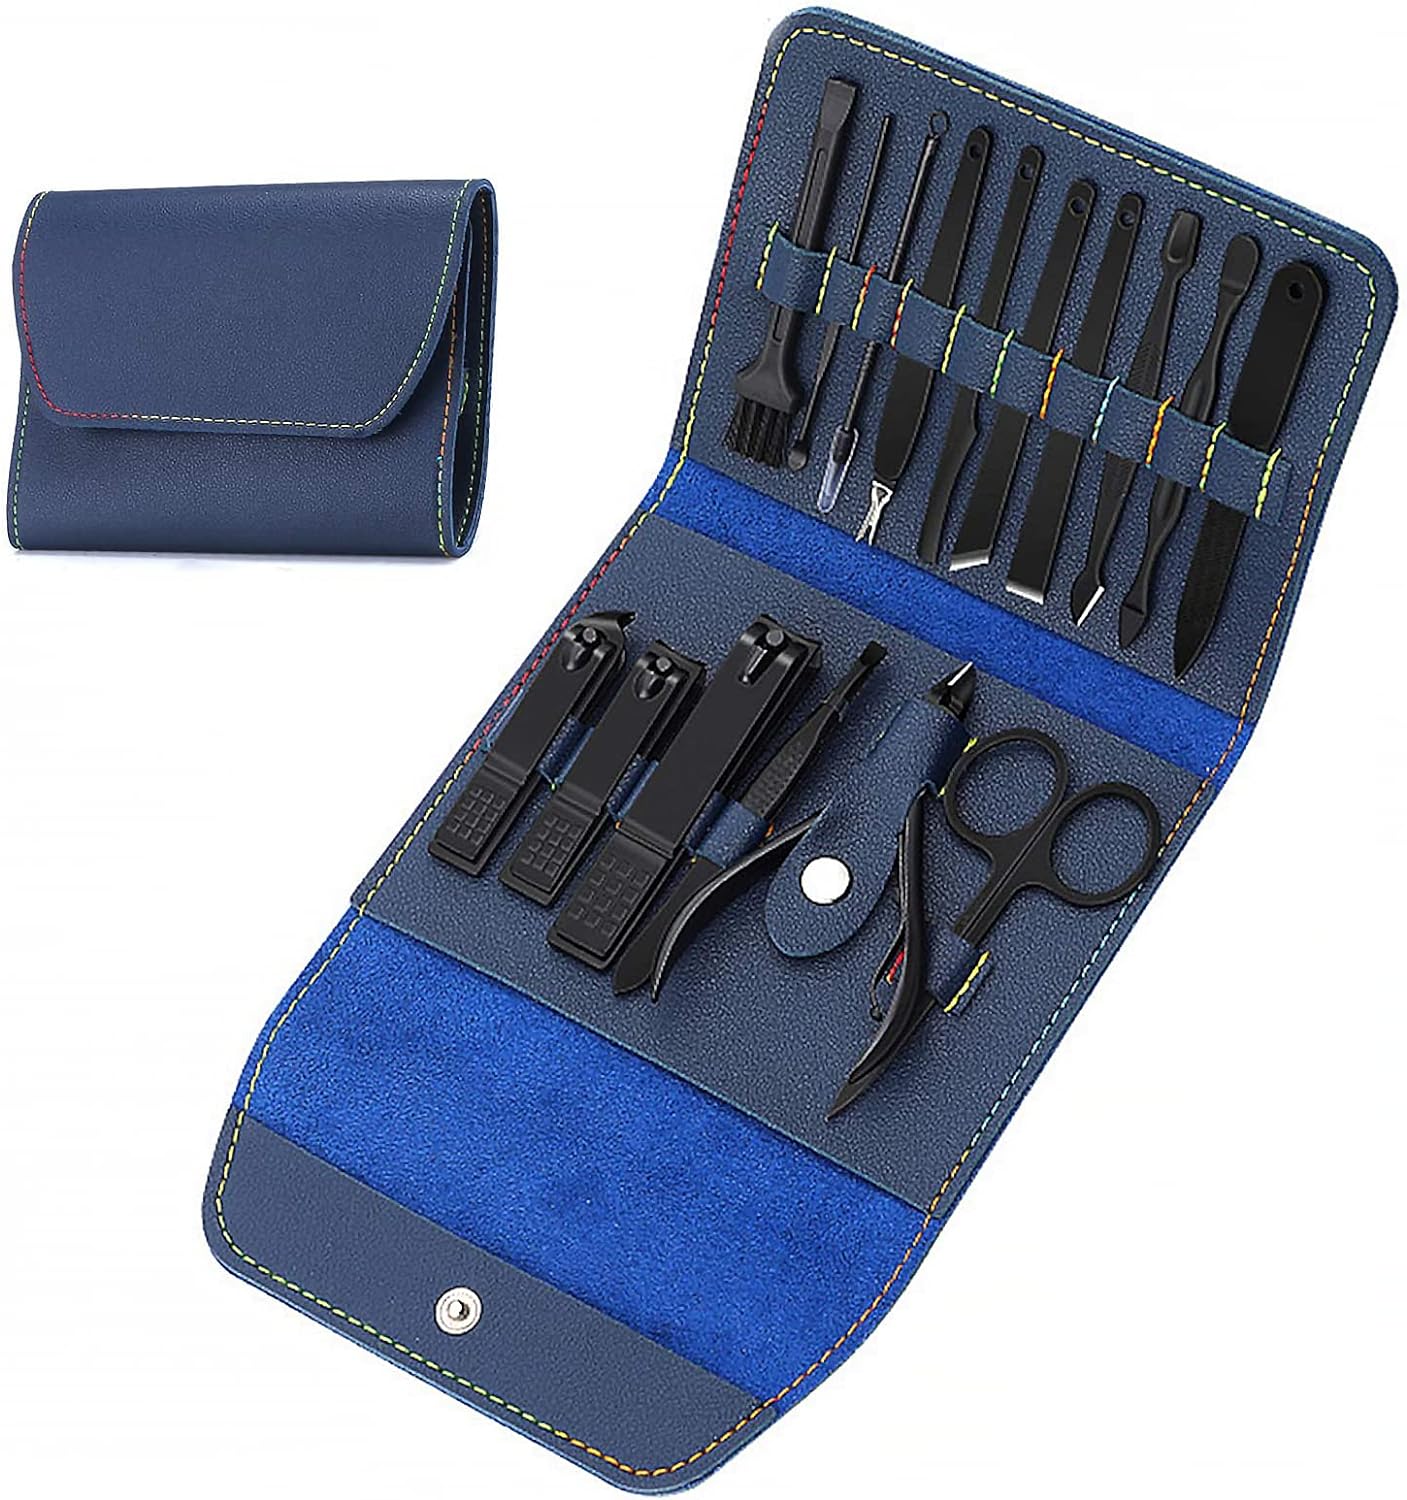 Manicure Pedicure Set 16 in 1 Stainless Steel Professional Nail Clippers Scissors Grooming Kit Nail Care Tools with Luxurious Case (Blue)